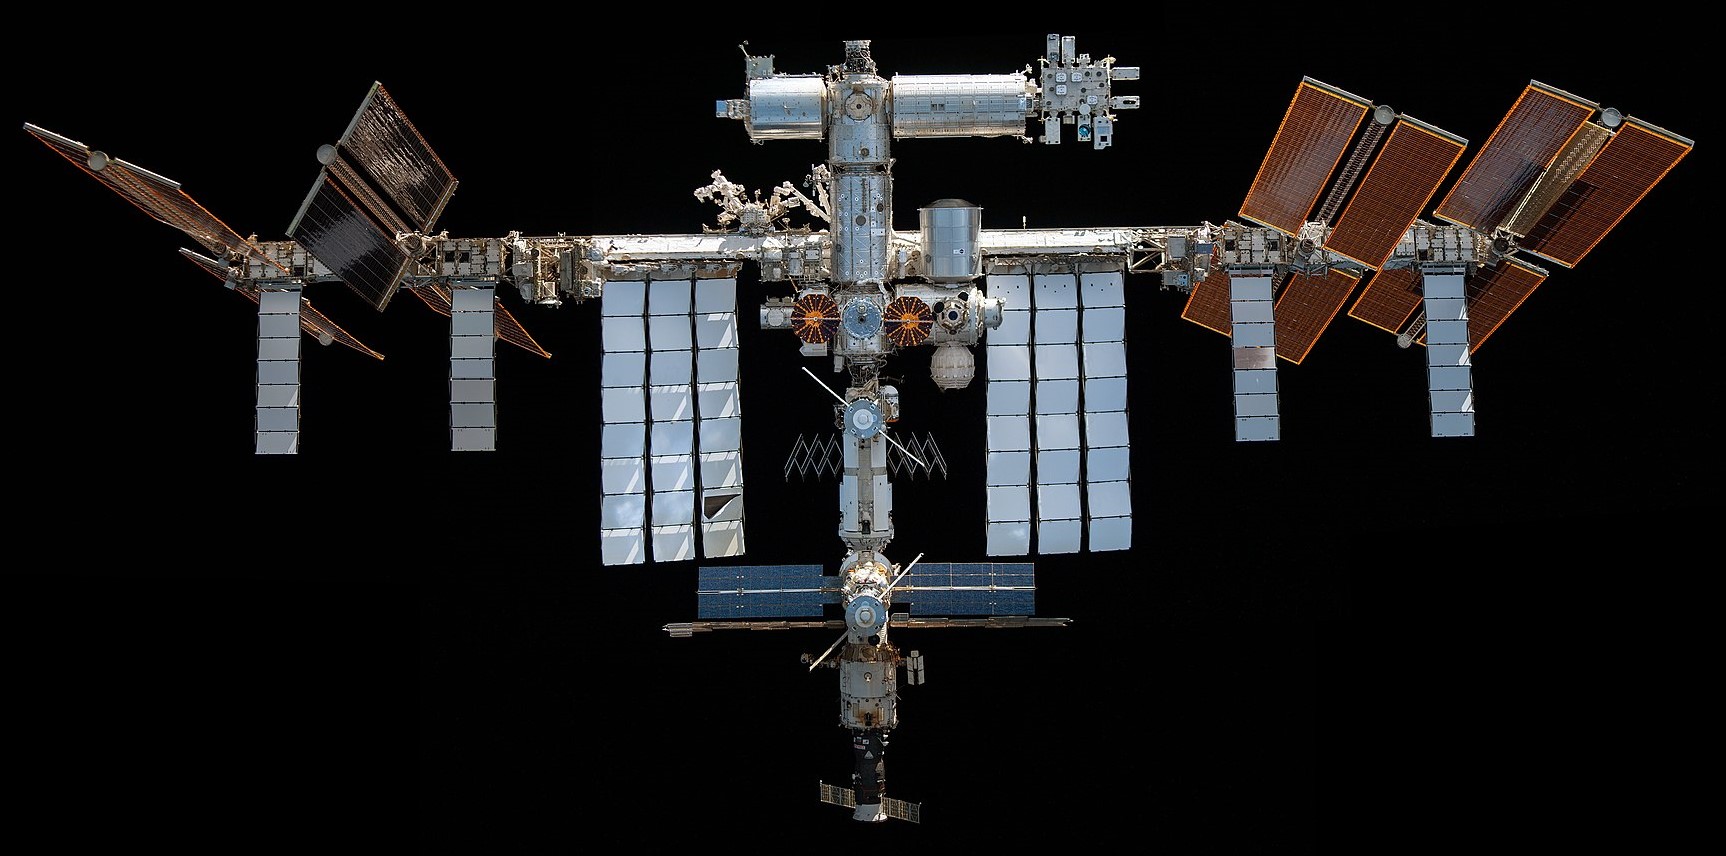 The International Space Station, the largest spacecraft in orbit